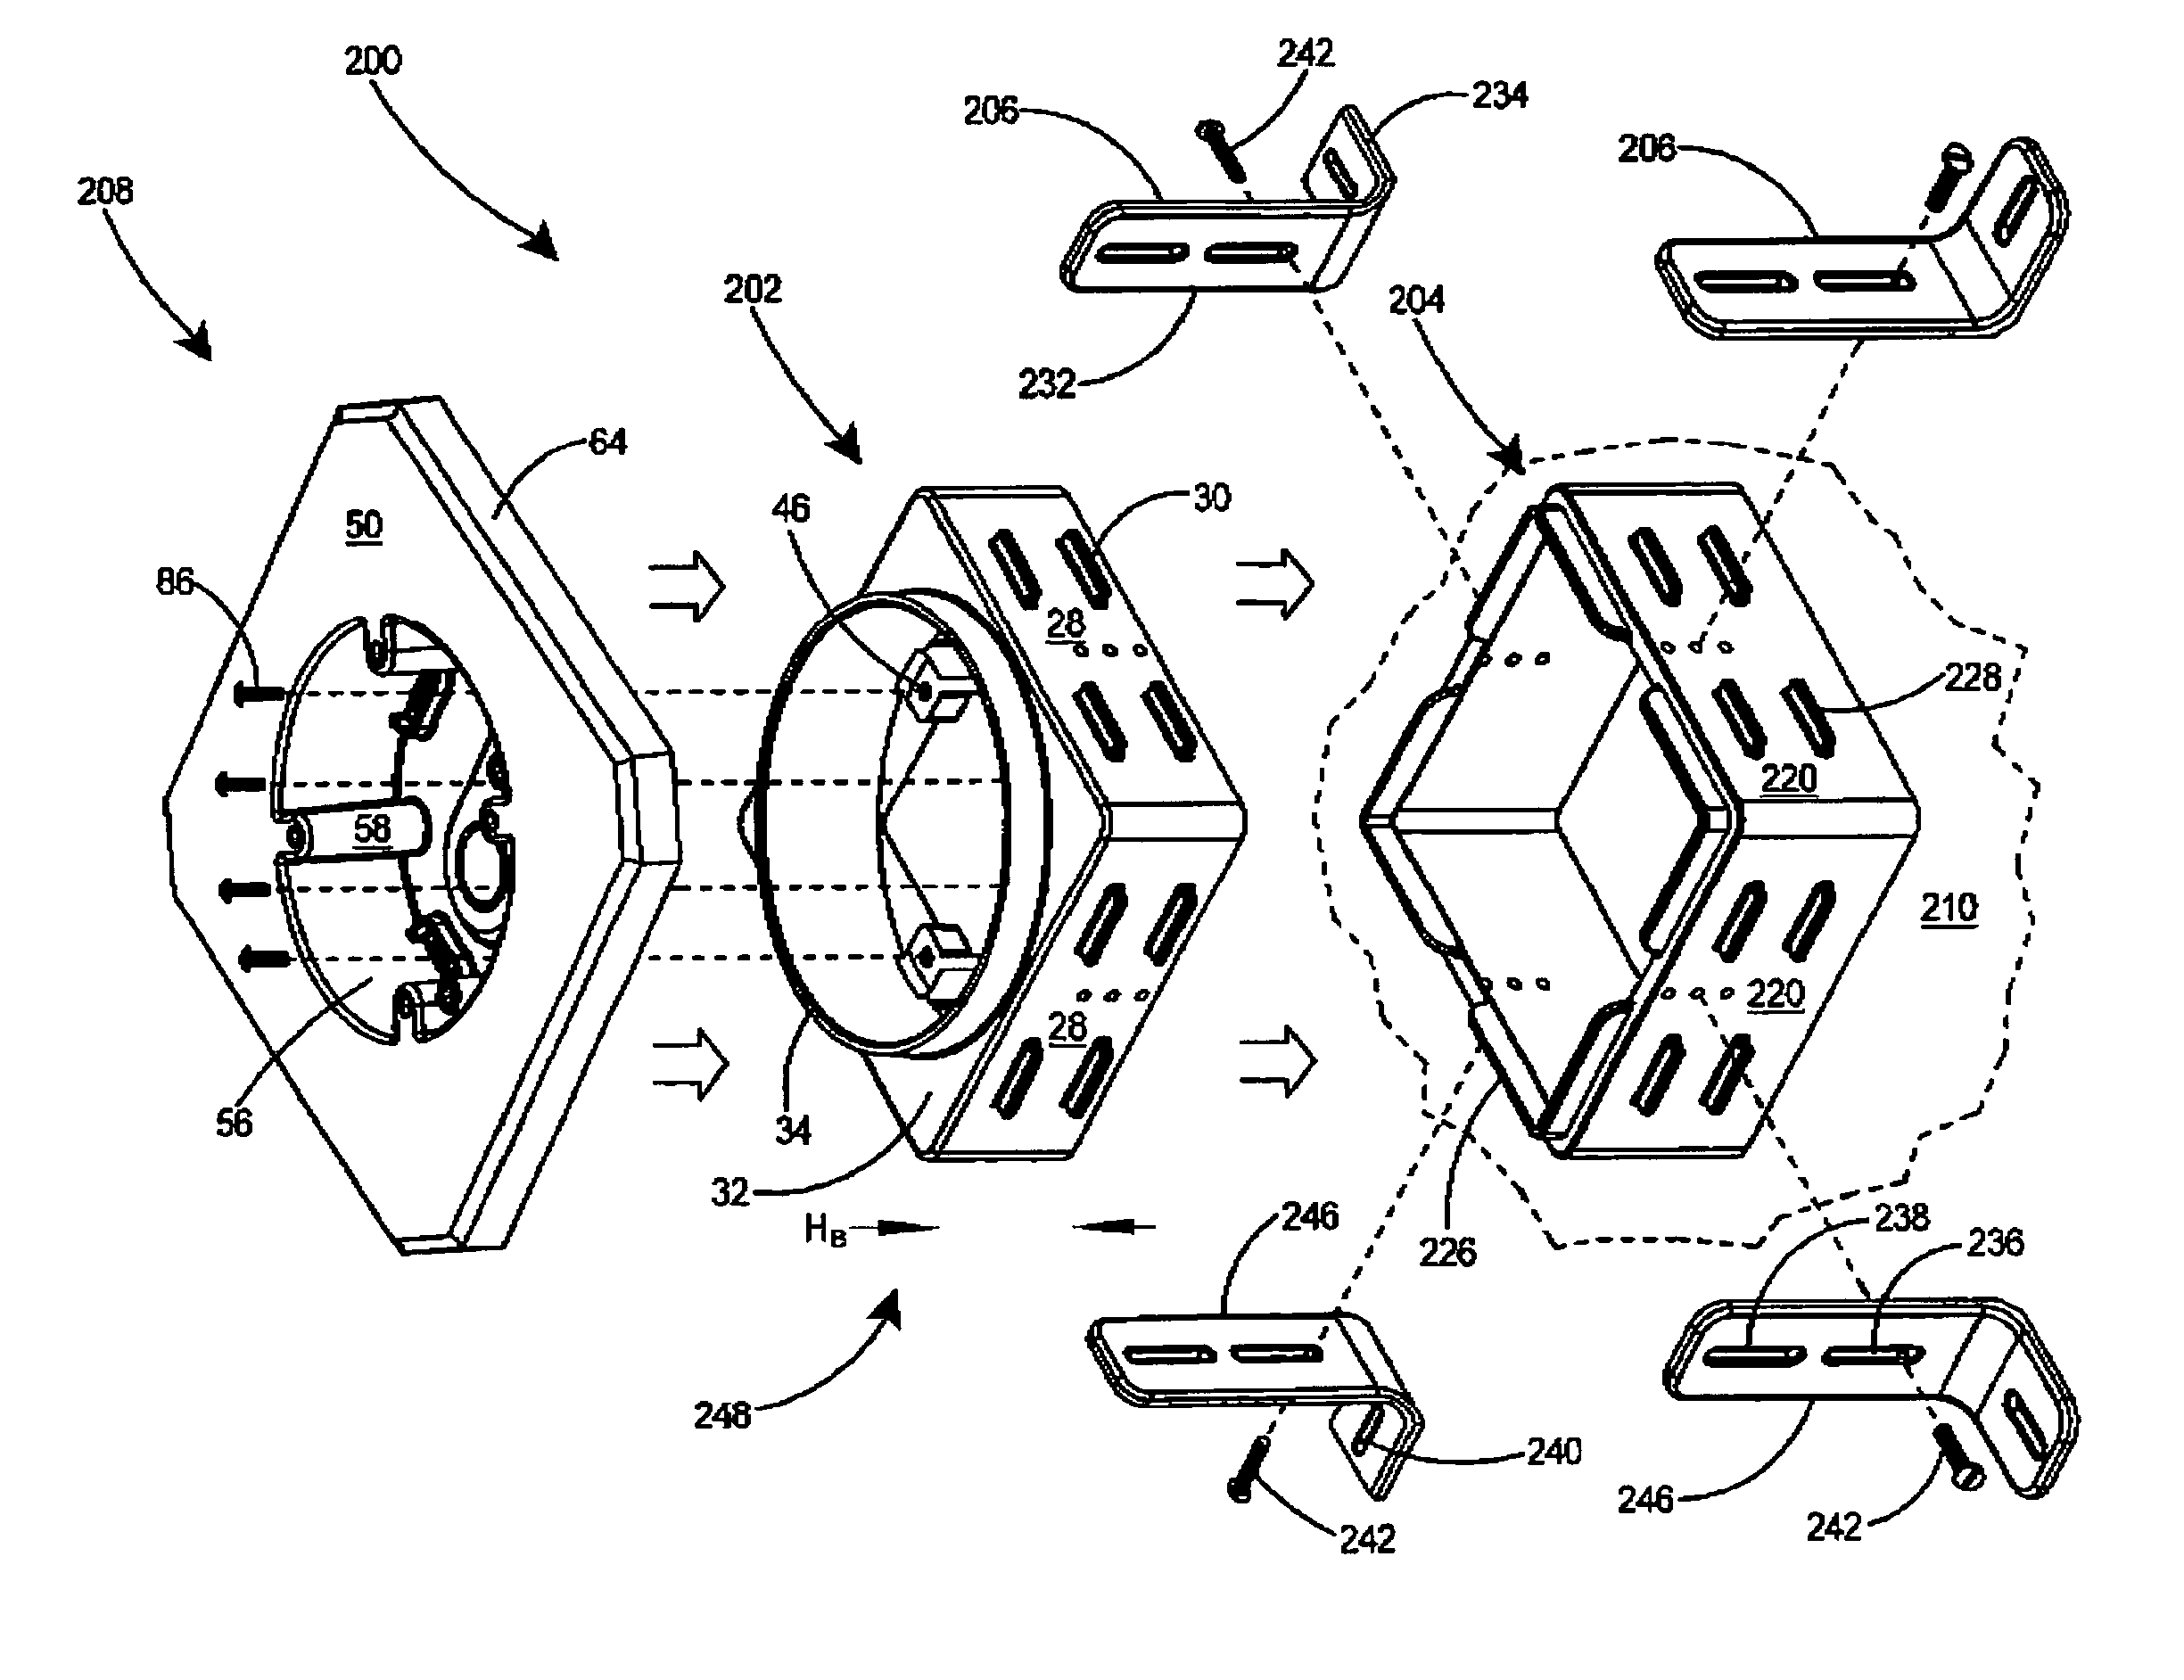 Adjustable electrical box for flush or offset mounting of electrical devices on brick or stone walls